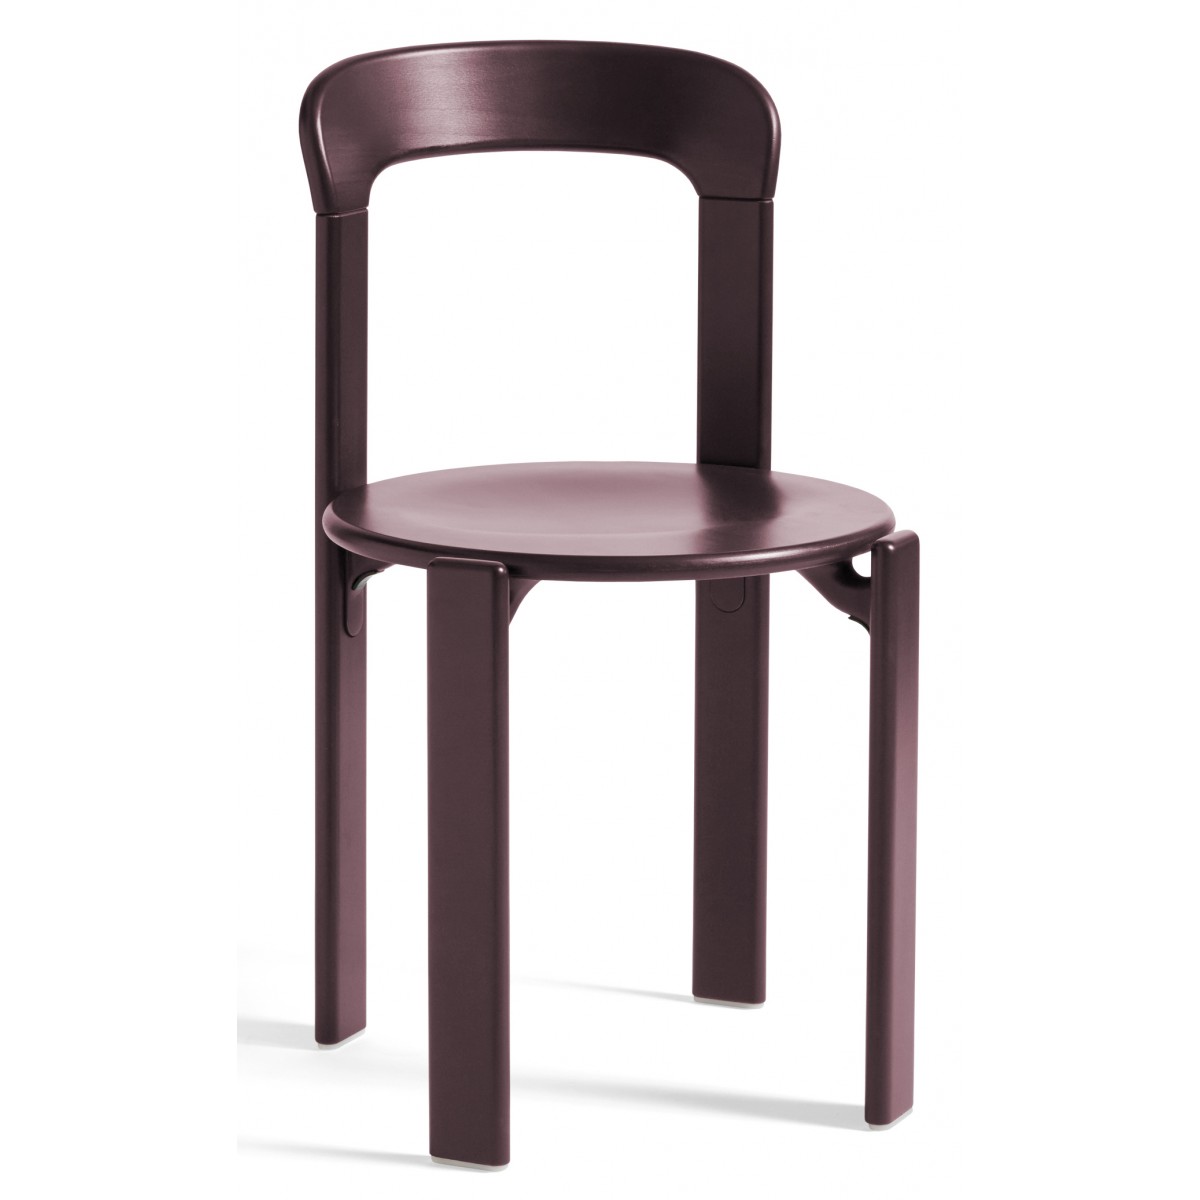 Grape red - REY chair